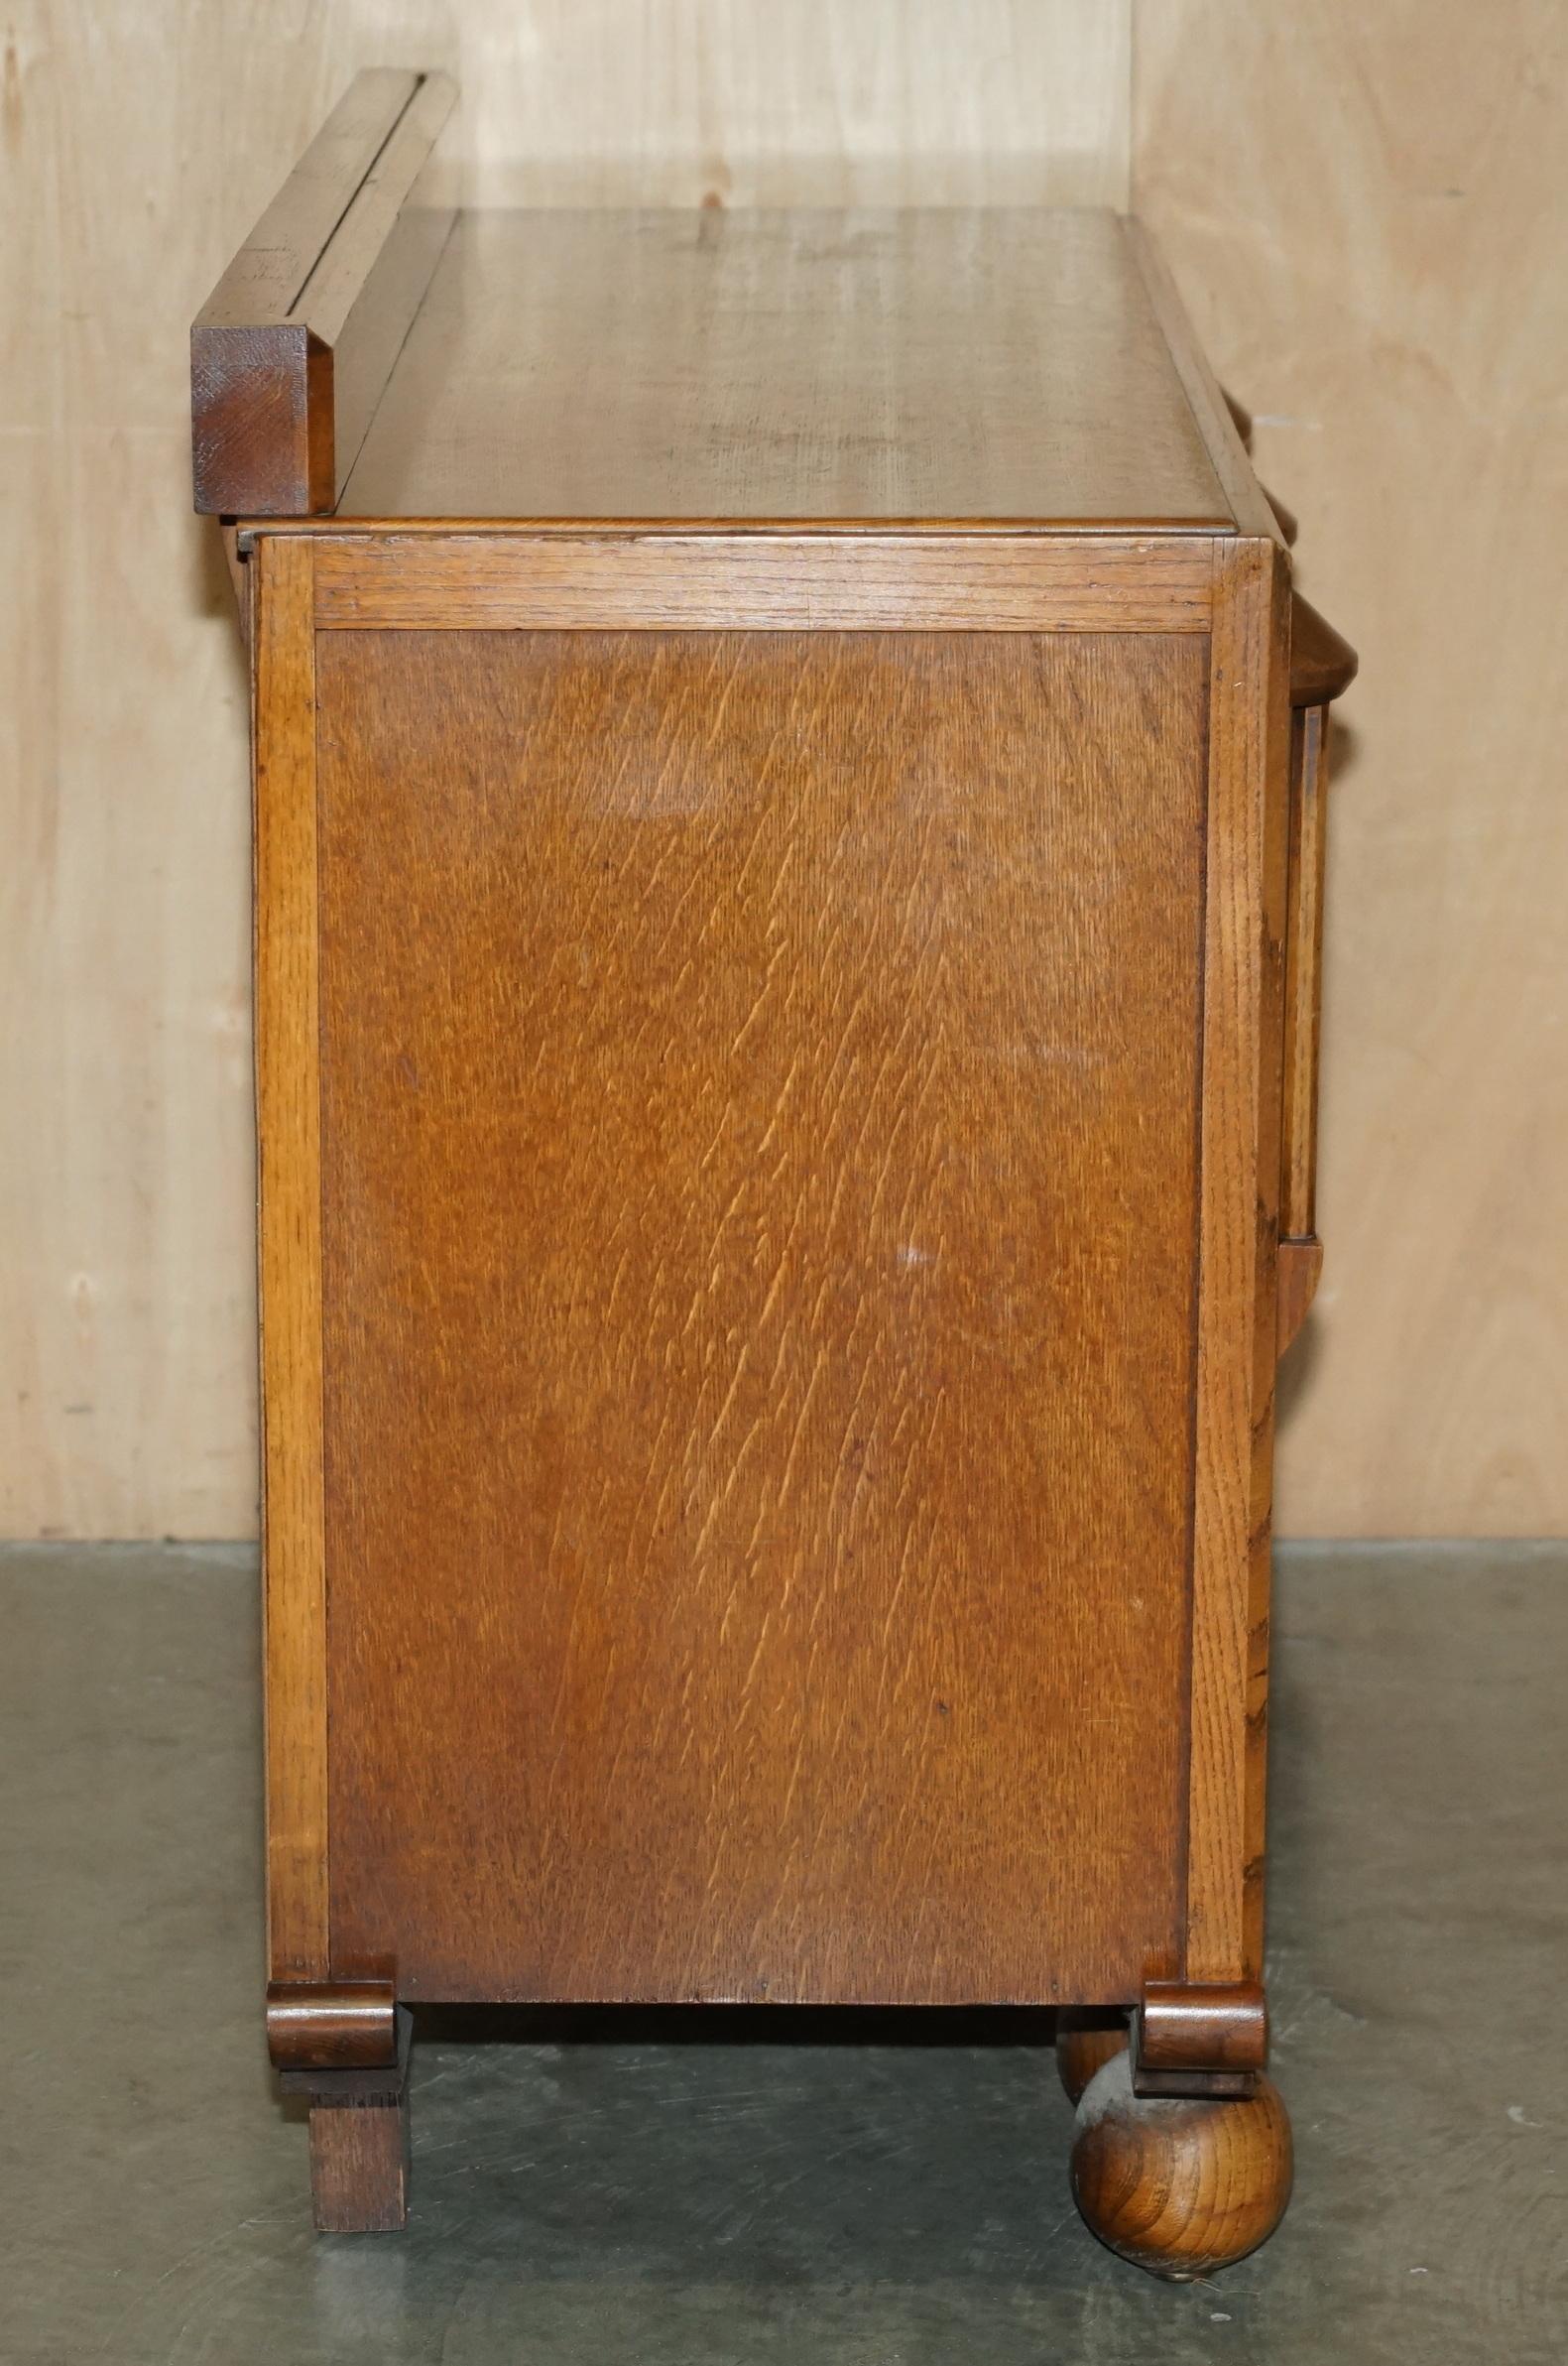 FINE LIBERTY'S COTSWOLD ART DECO OAK CARVED SiDEBOARD CIRCA 1920 PART OF A SUITE im Angebot 7